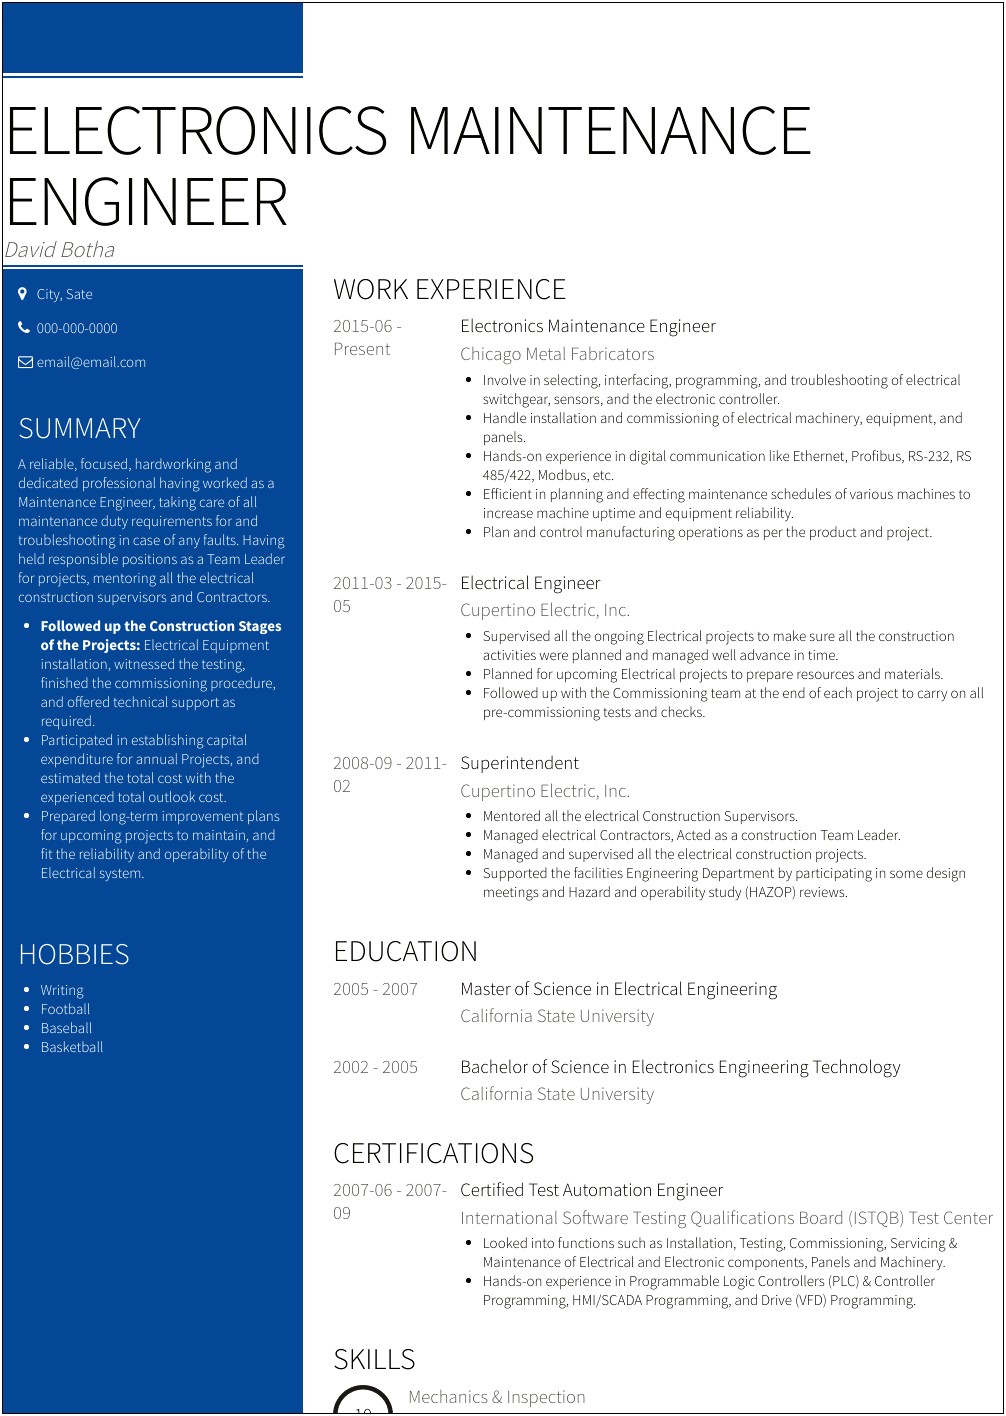 Sample Resume For Freshers Engineers Pdf Download